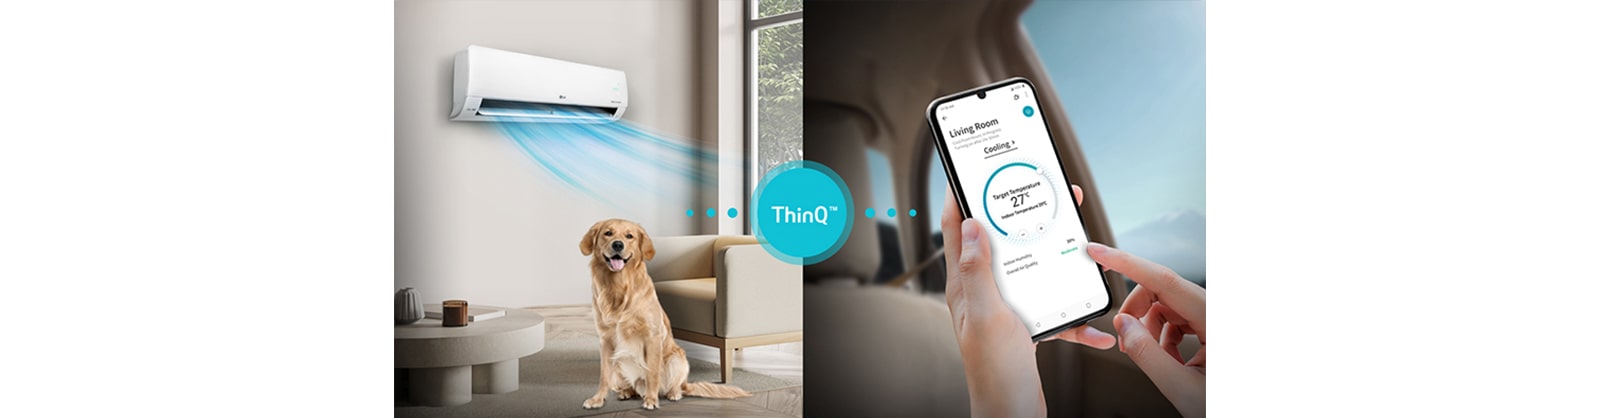 Operating the air conditioner outdoors with LG ThinQ